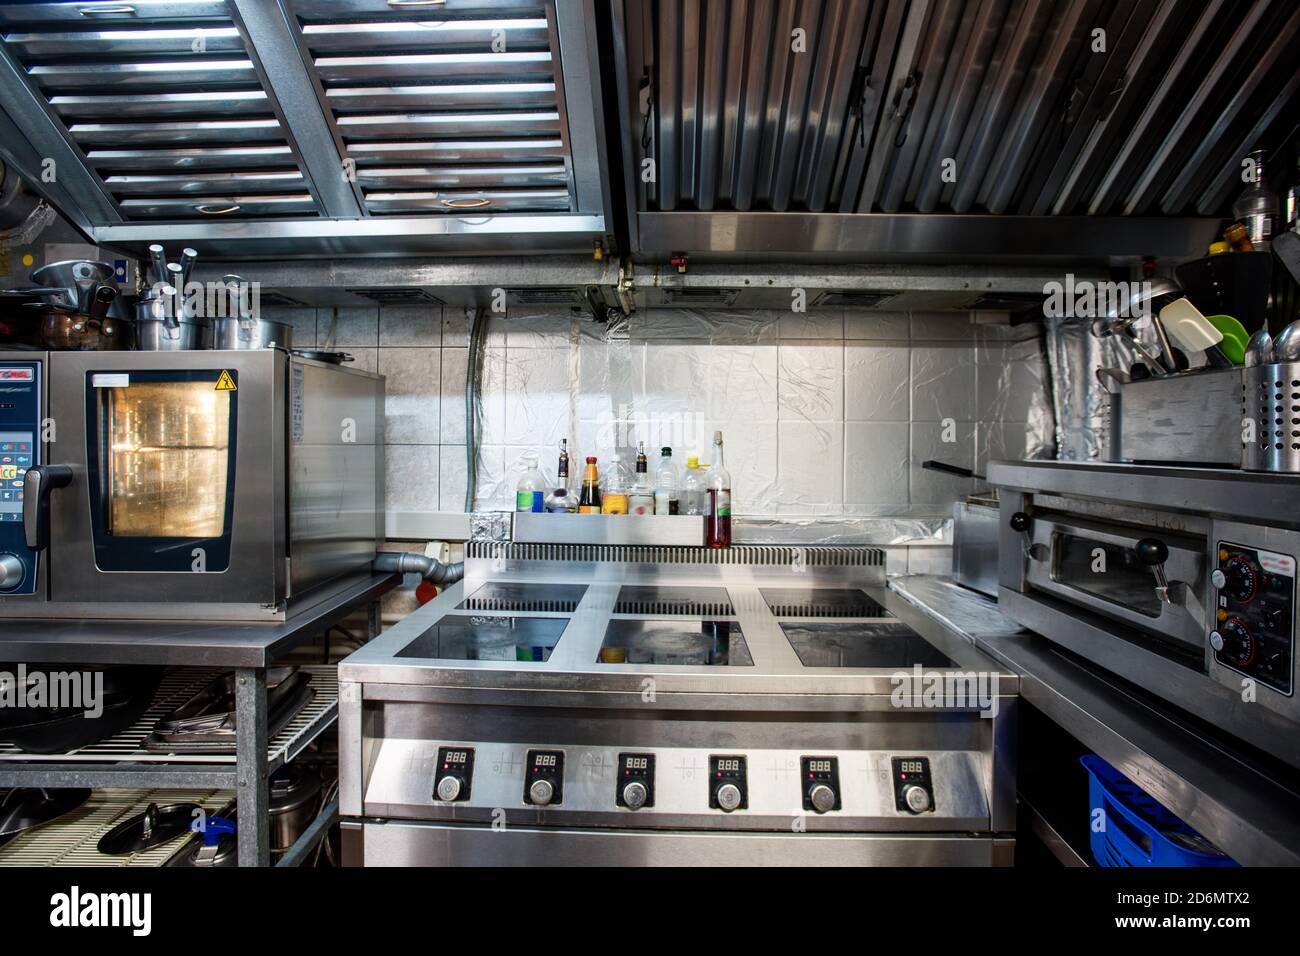 Part of interior of modern restaurant kitchen including electric stove and oven Stock Photo